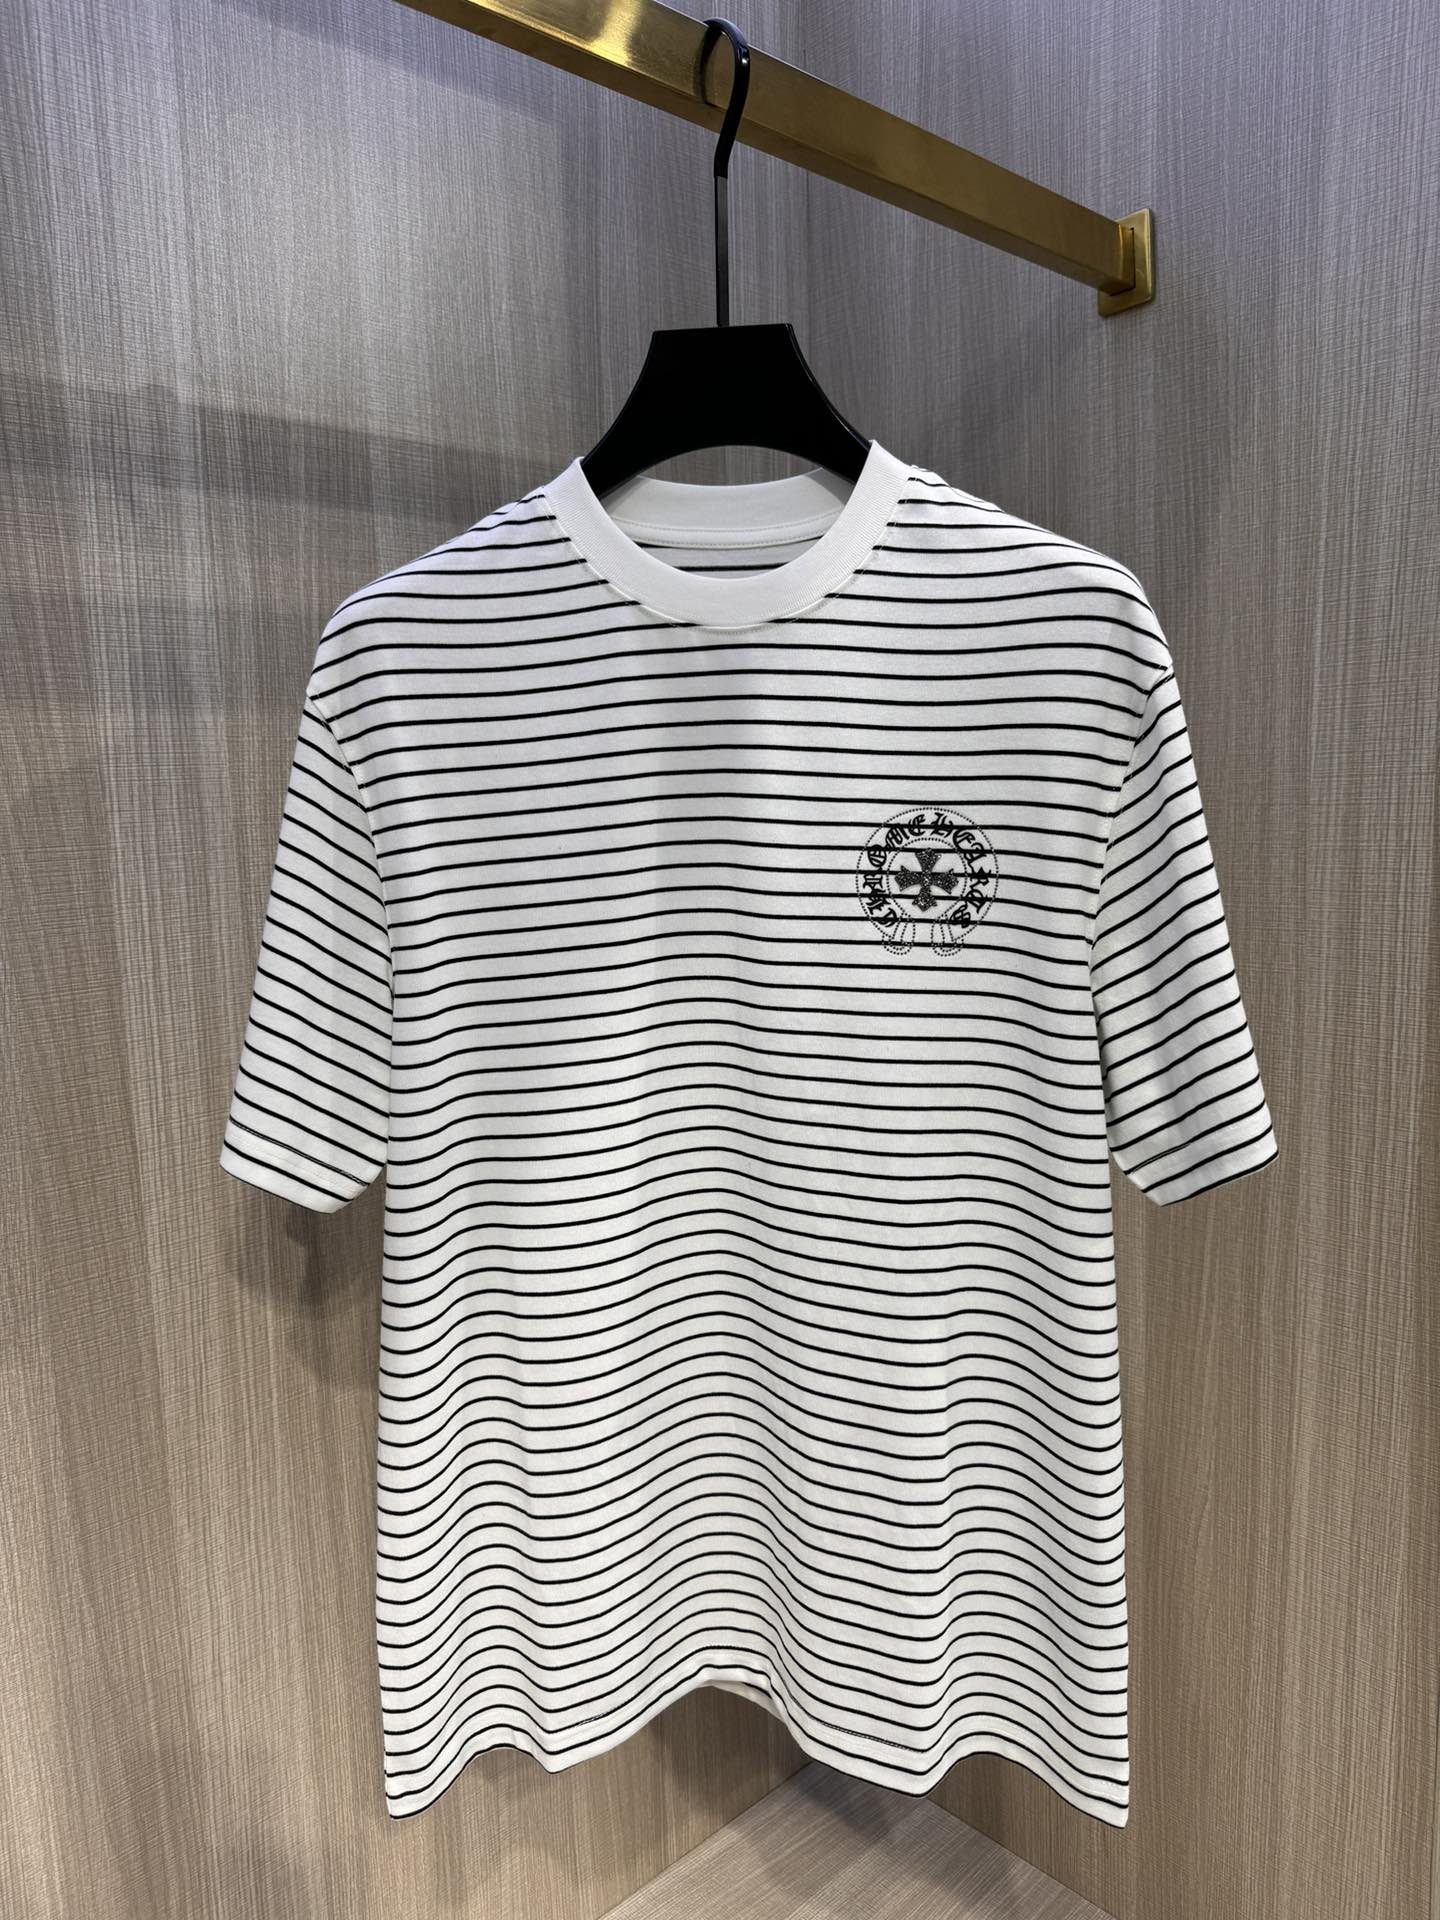 Chrome Hearts Clothing T-Shirt Black White Unisex Cotton Spring/Summer Collection Short Sleeve H24003